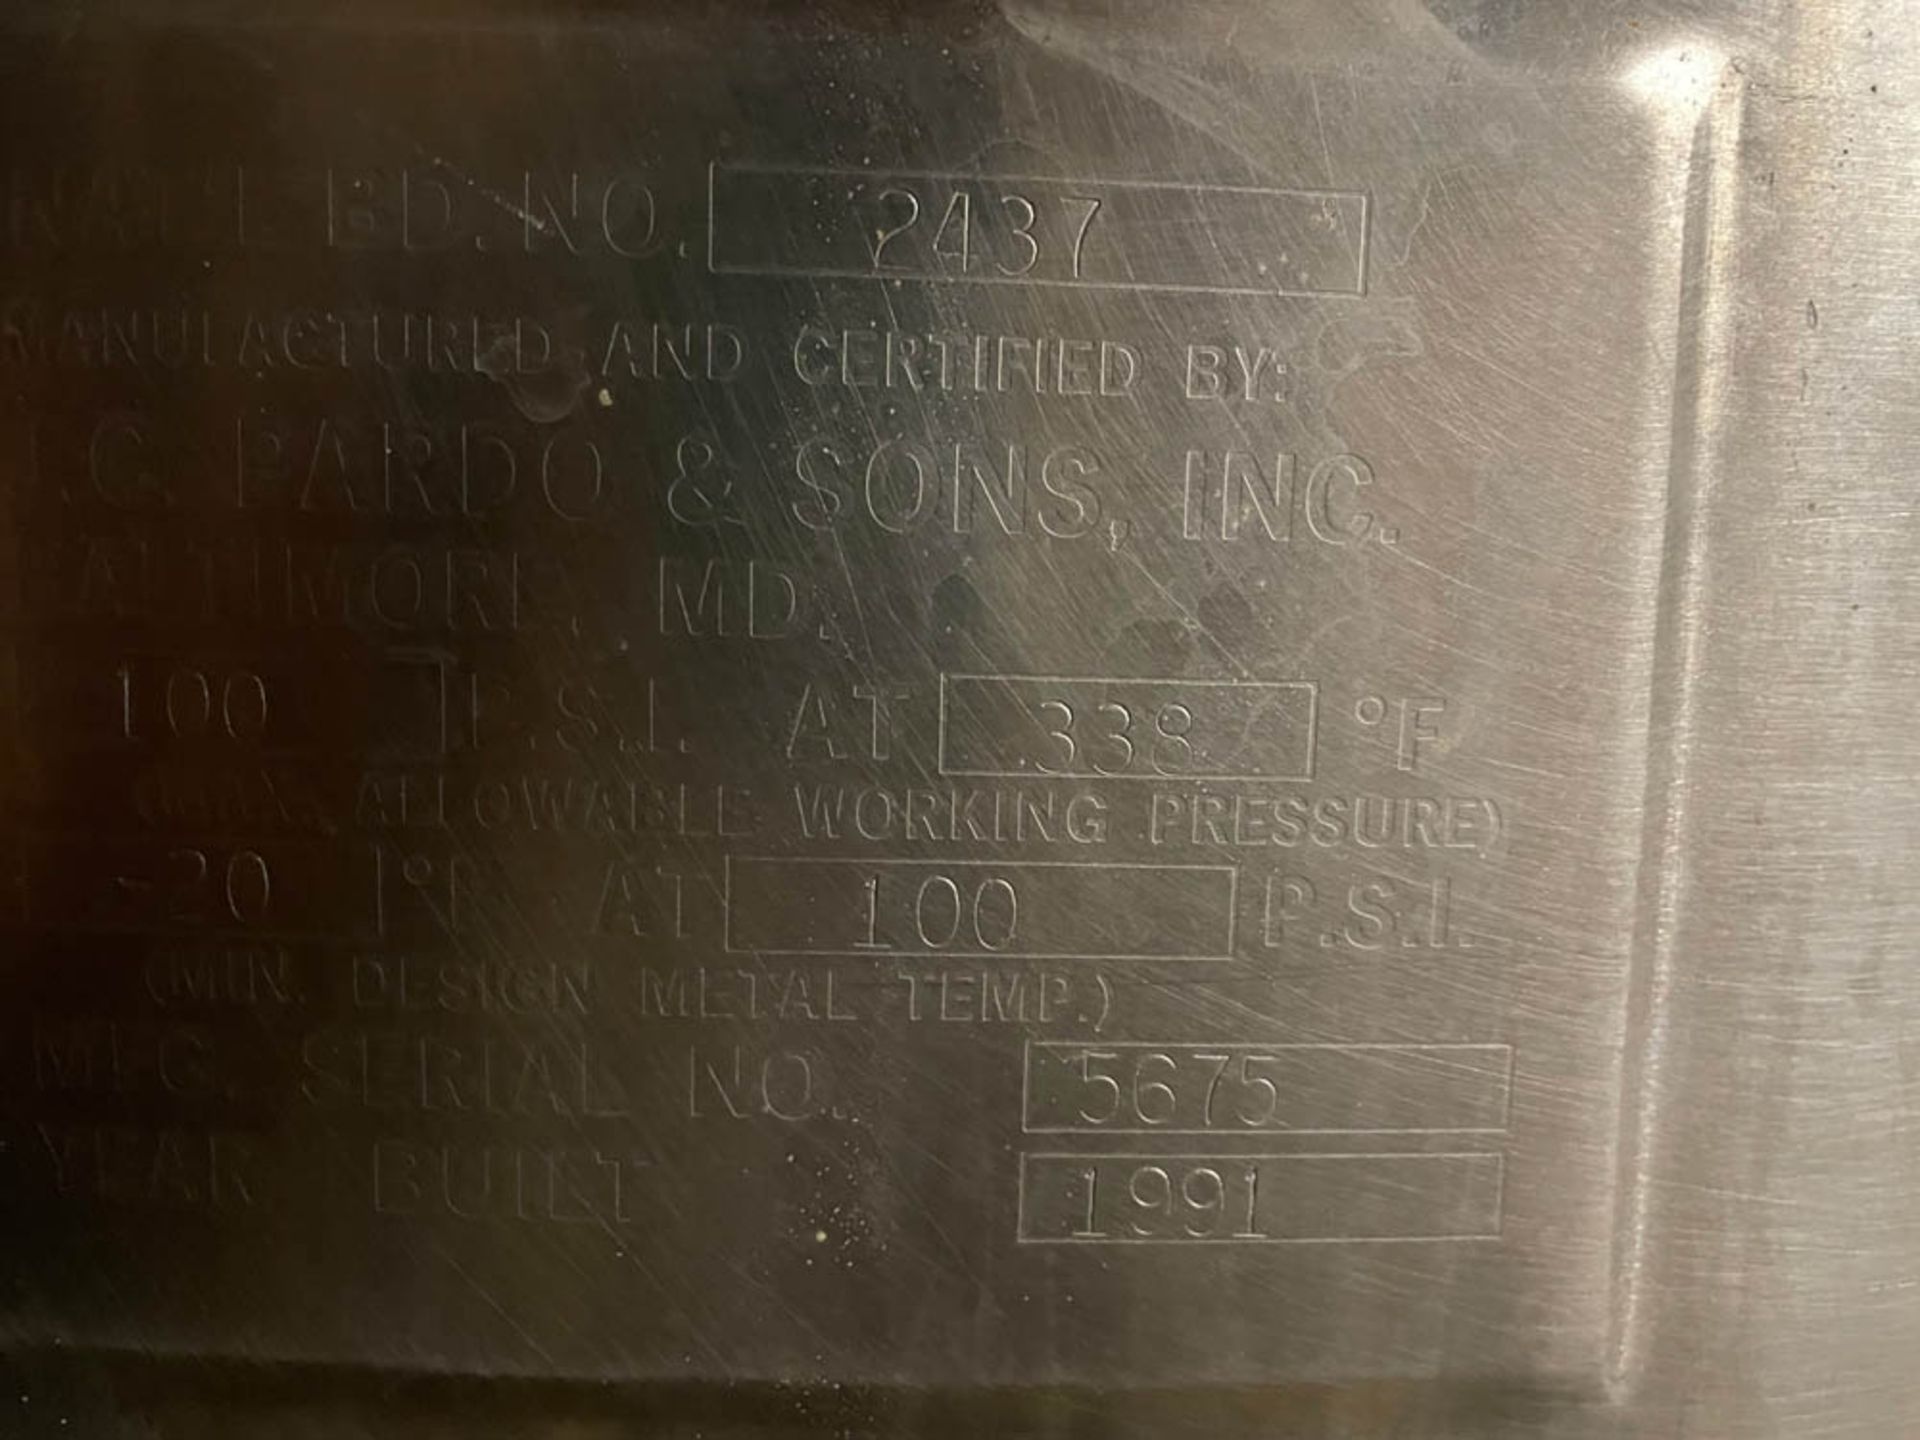 JC Pardo & Sons, Inc. 100 Gallon Jacketed Kettle - Image 8 of 13